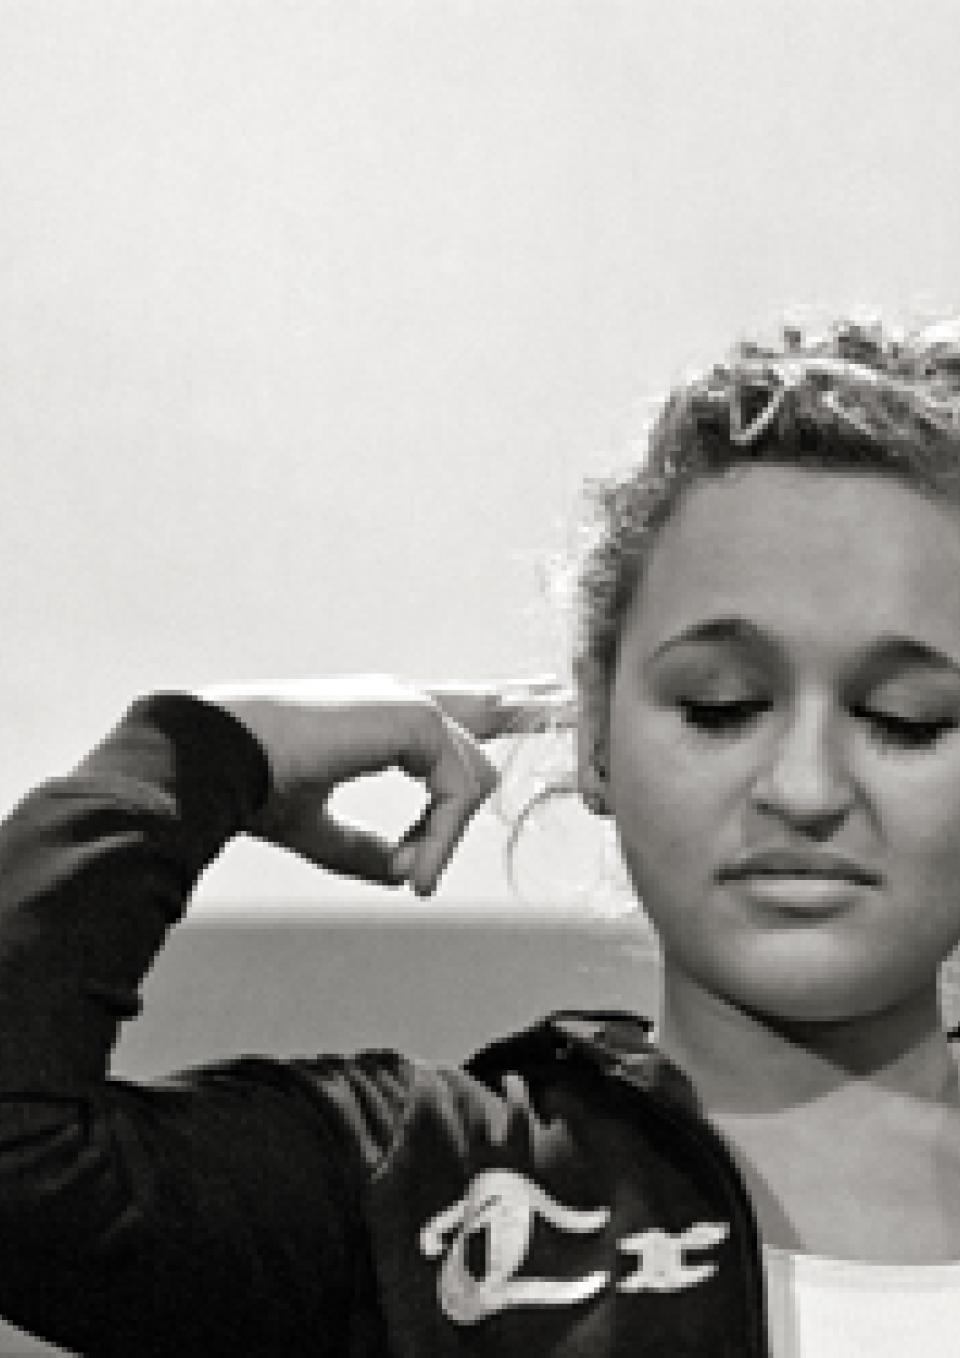 A black and white still from the New Day film Deaf Jam. Young ASL poet Aneta Brodski closes her eyes with a vulnerable but dignified expression on her face. She holds out one finger pointed out towards her ear. She wears her curly hair up in a bun and her hoodie is open to show a white top underneath.